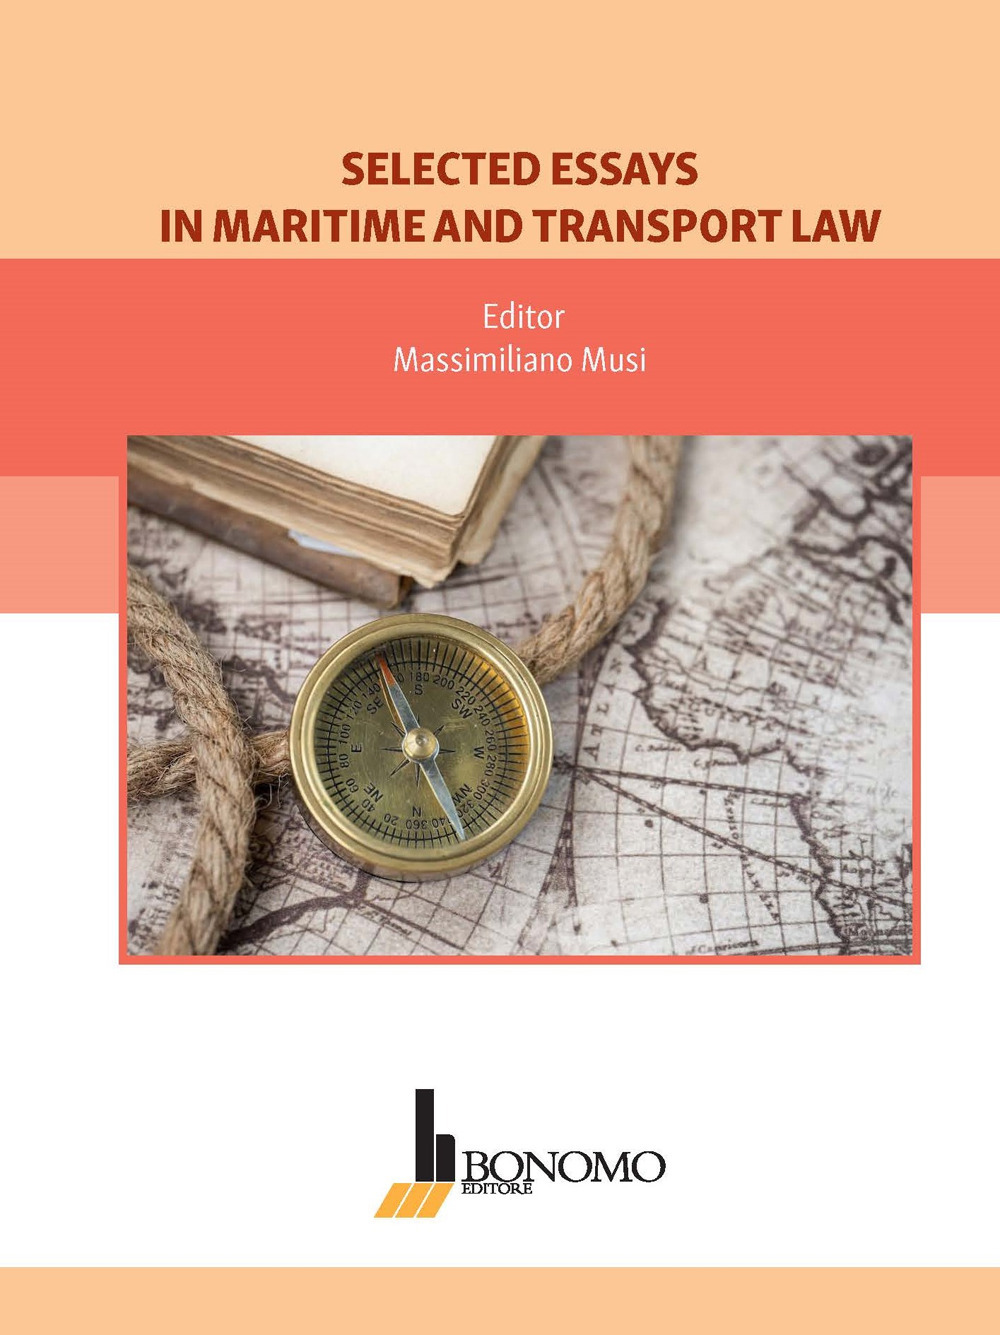 Selected essays in maritime and transport law